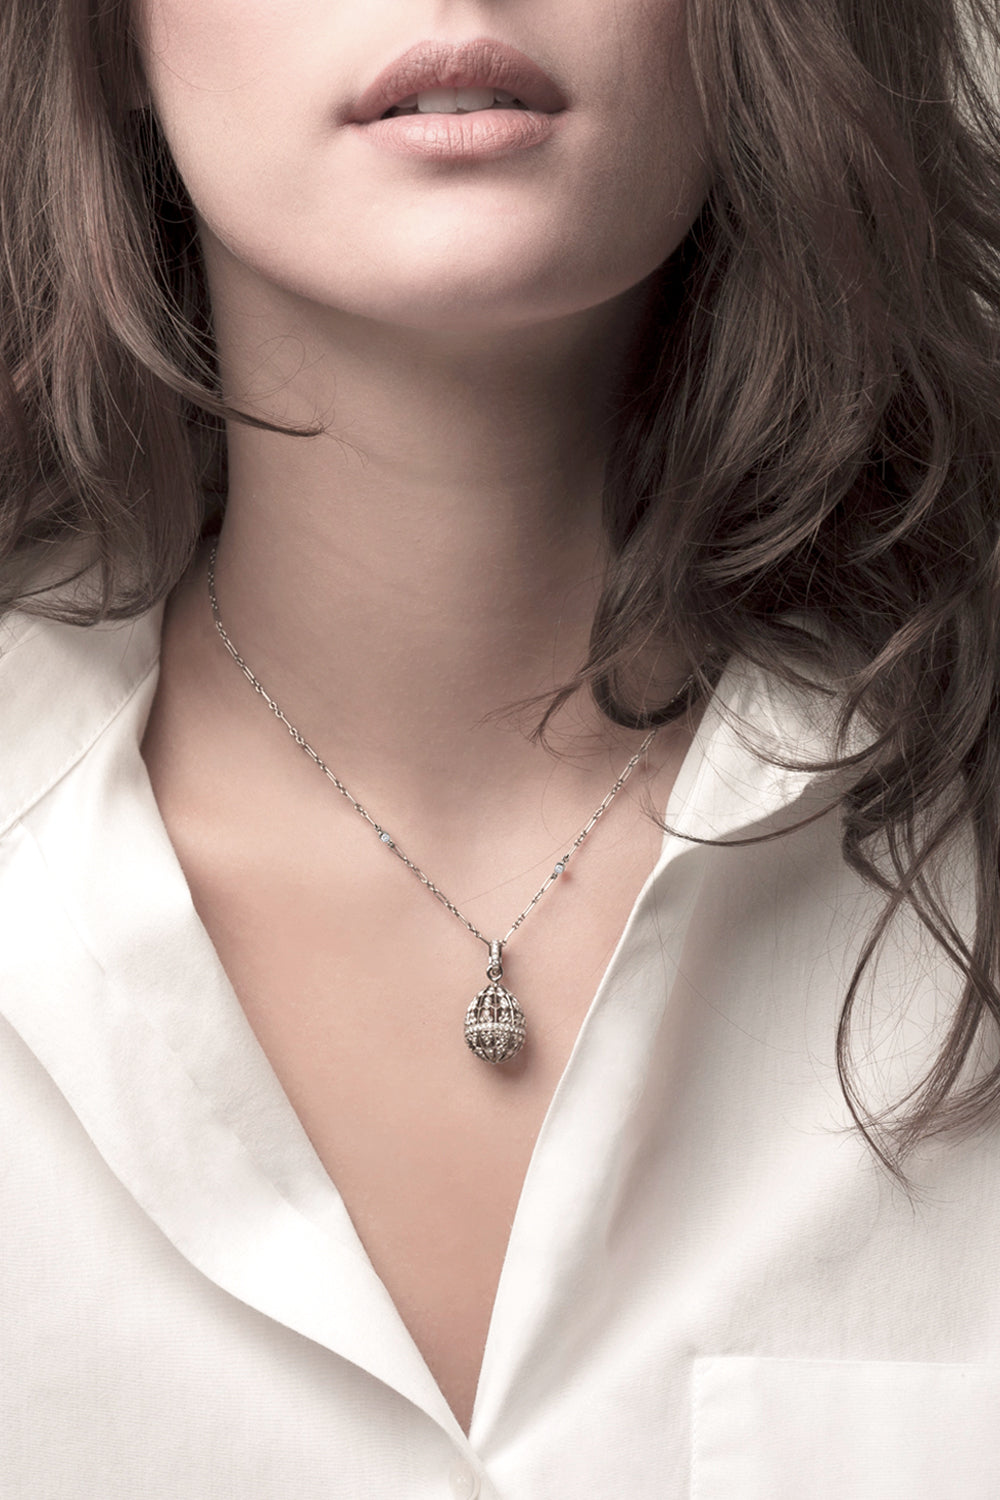 The Pride Emotion  Pendant in White Gold